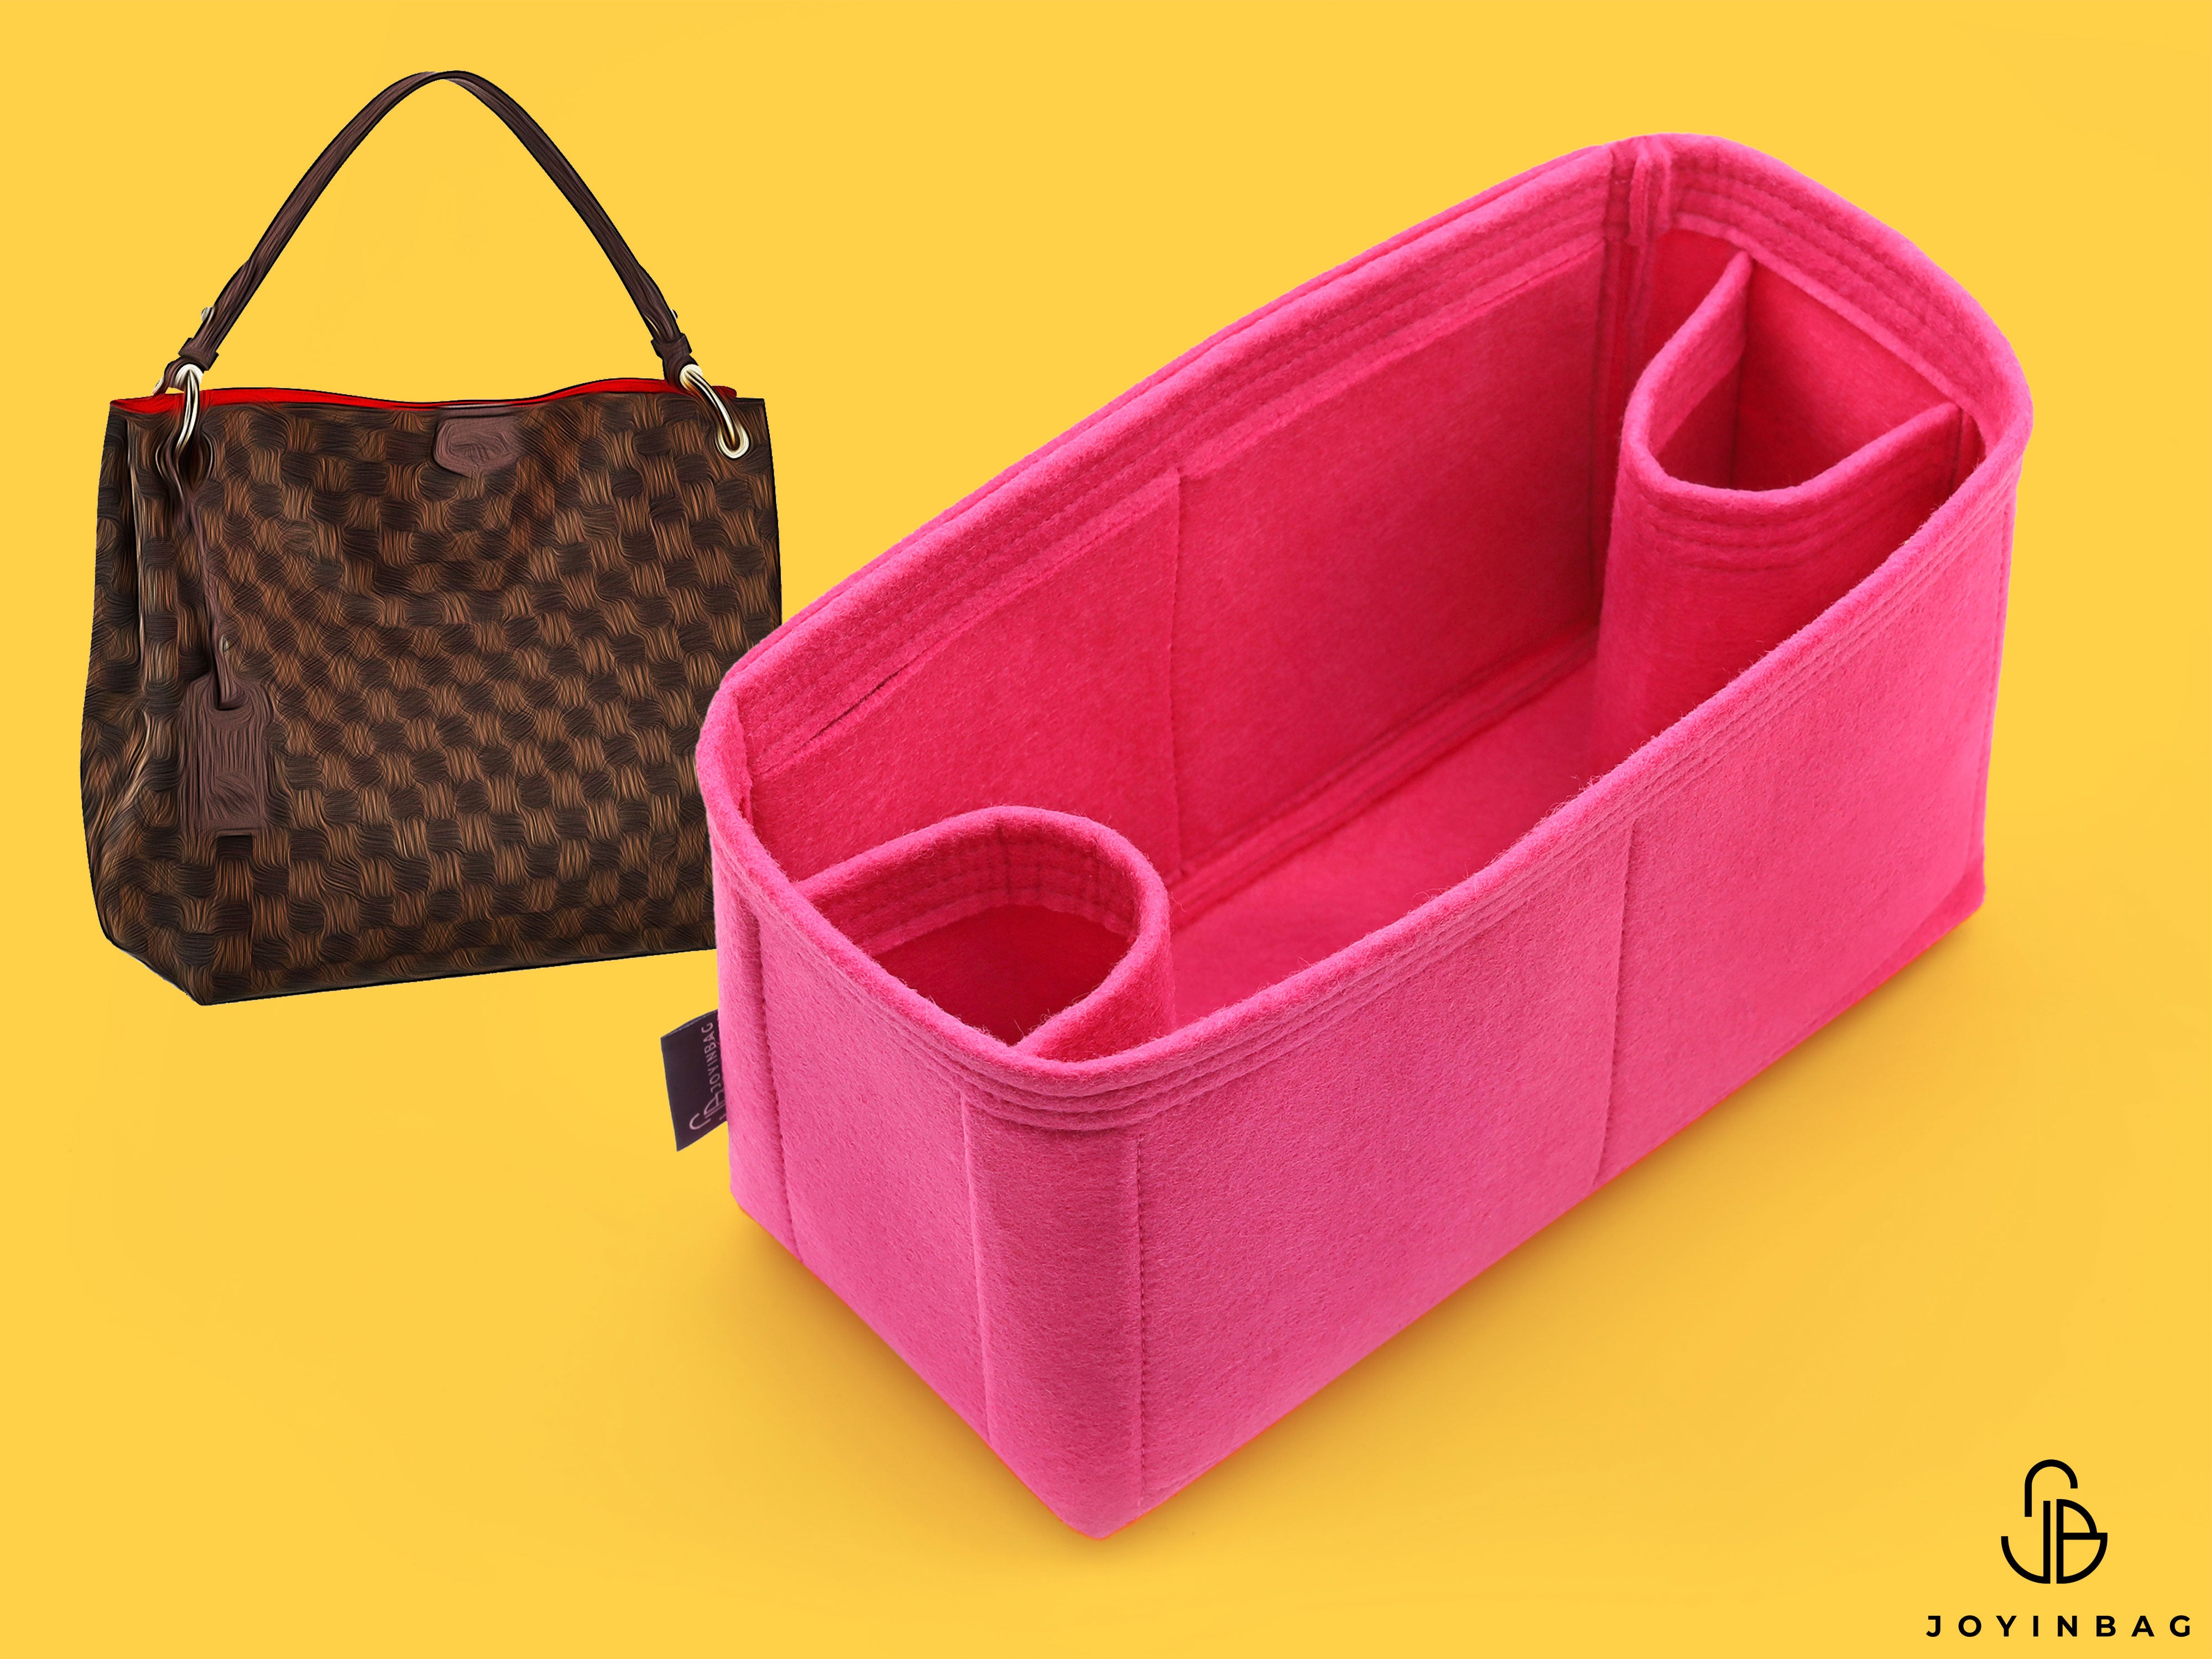 LOUIS VUITTON CARRYALL PM AND GRACEFUL PM, WHAT FITS